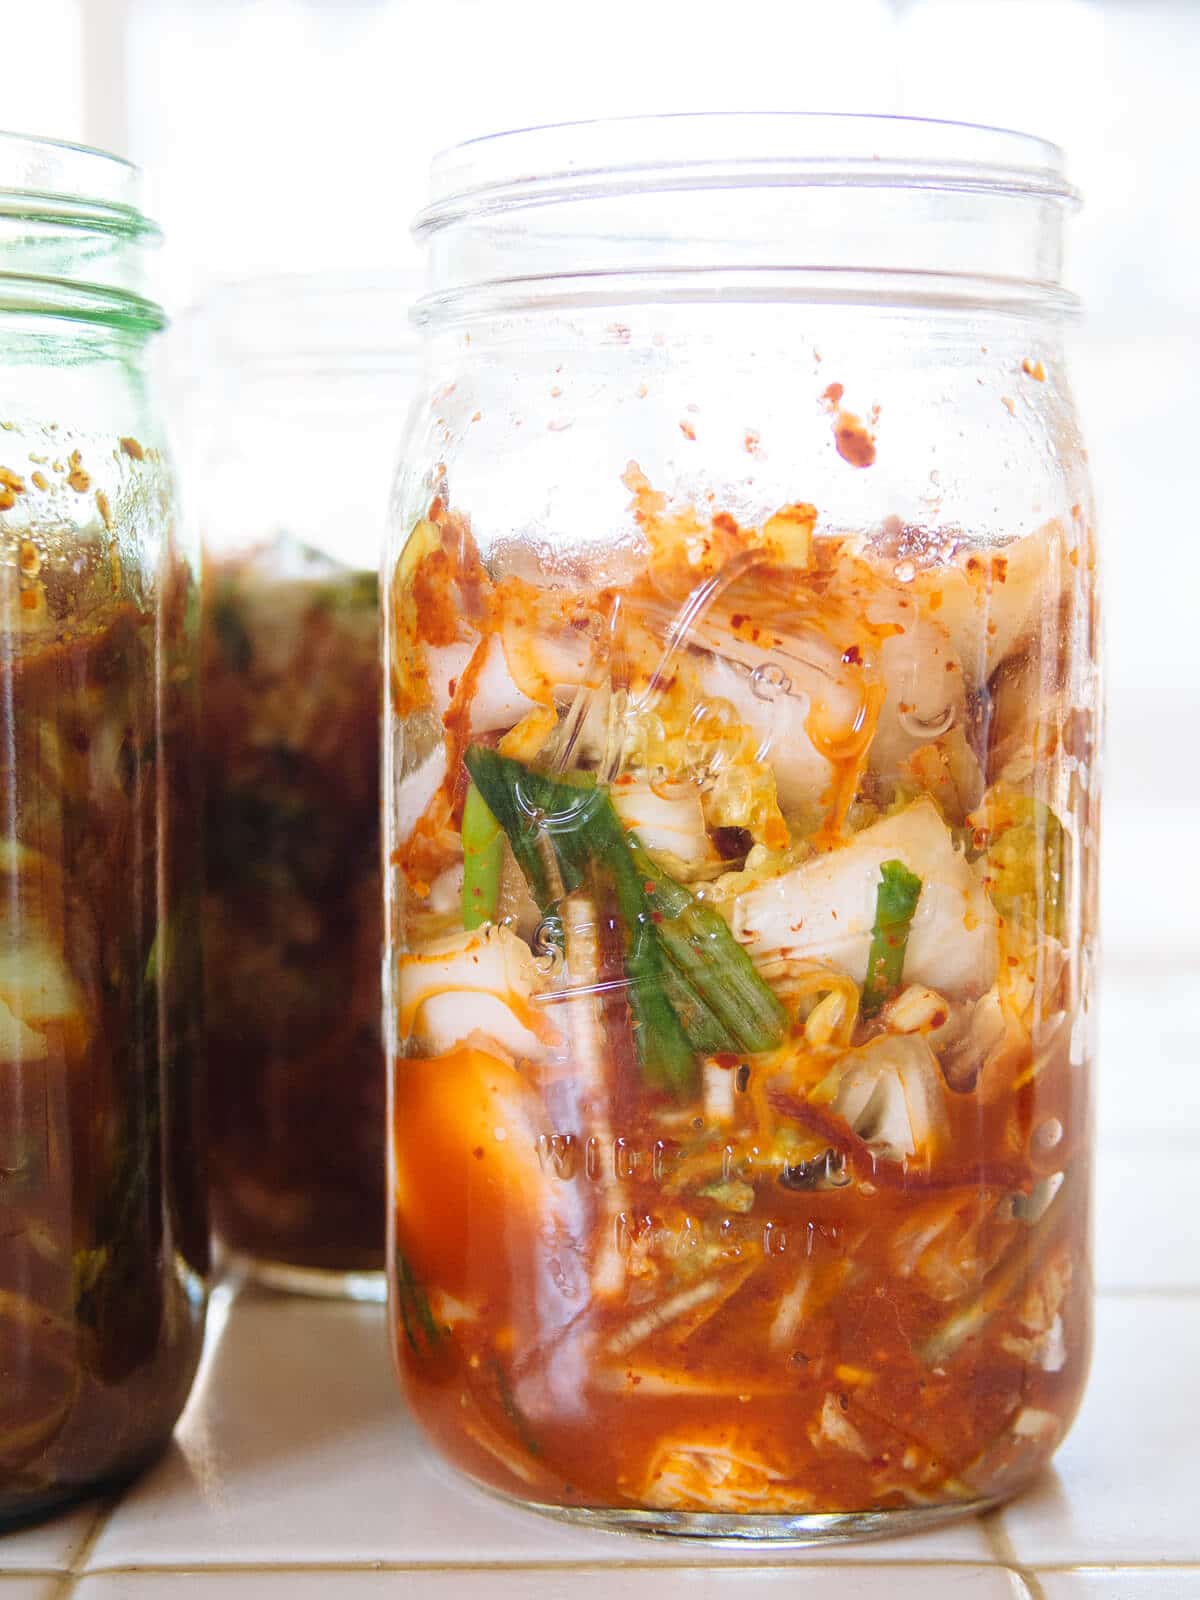 The vegetables will naturally release more liquid as they ferment